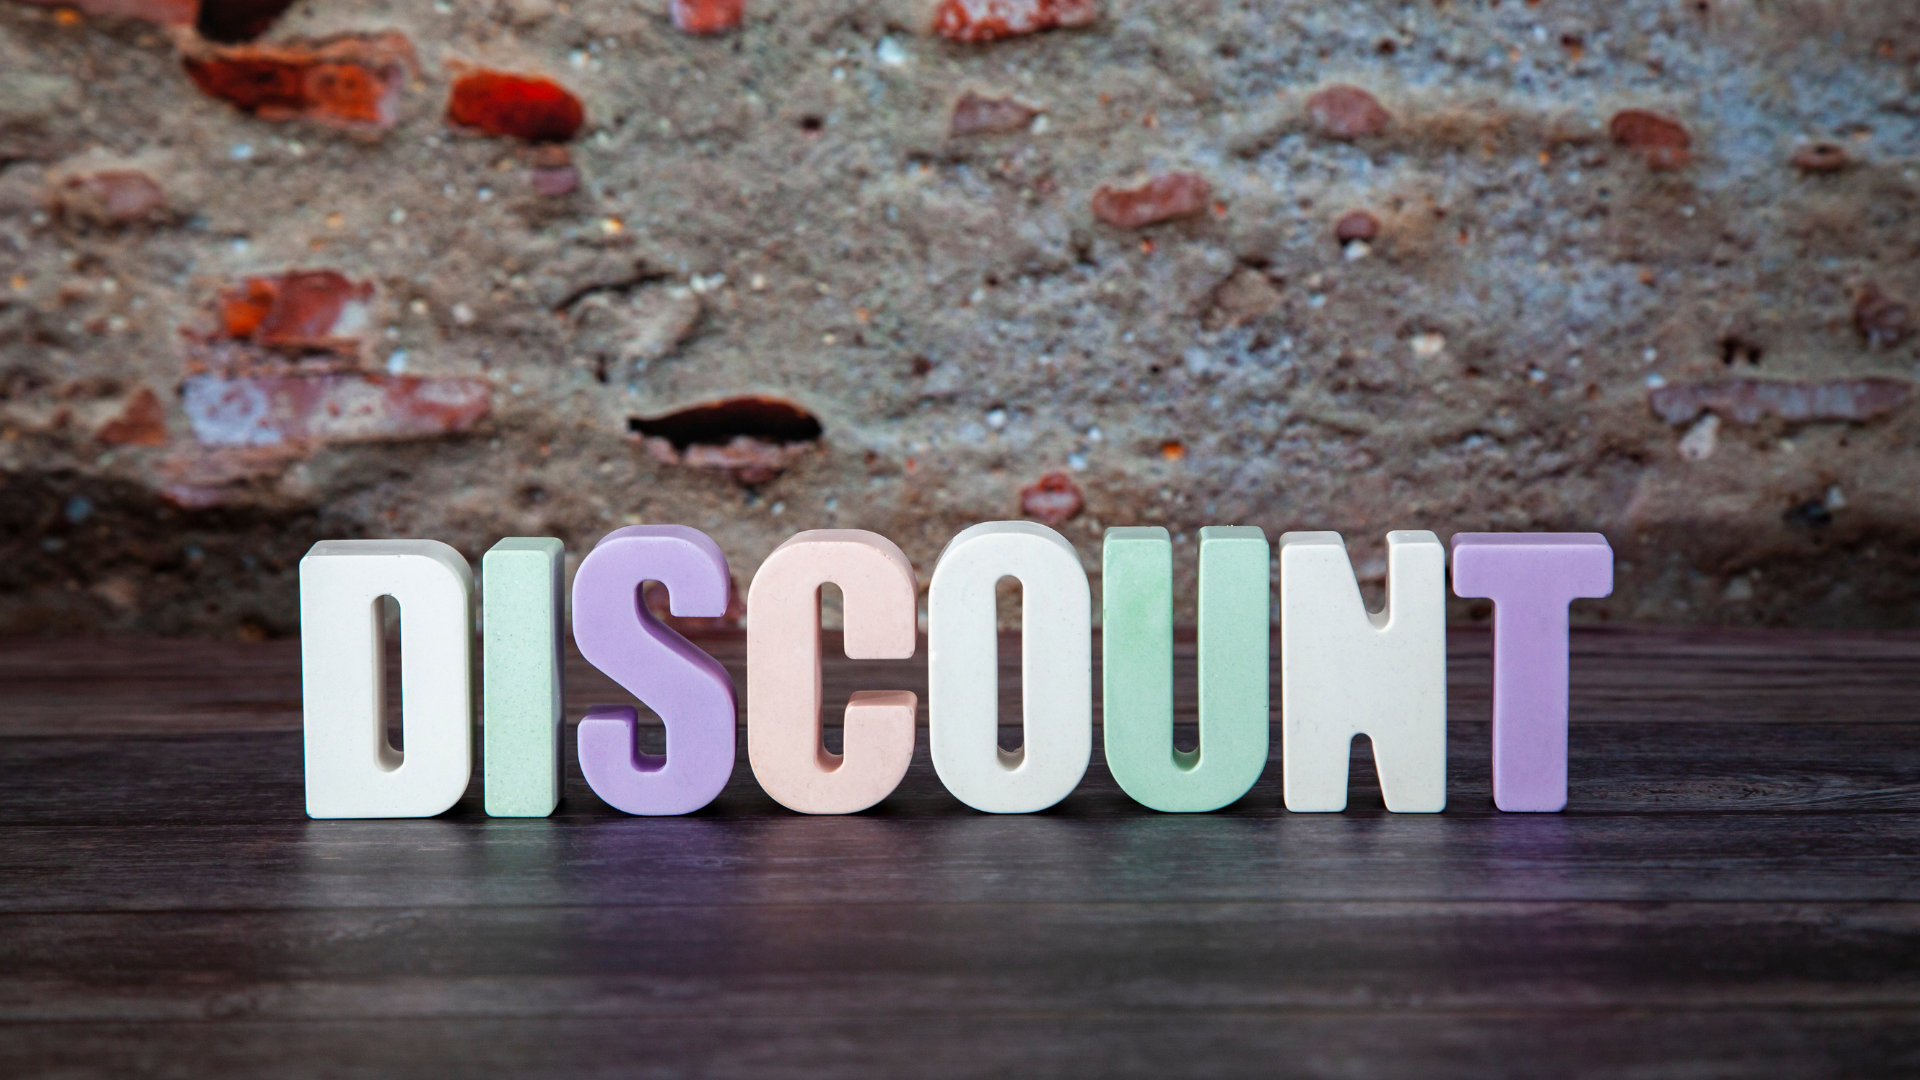 Creating Discount Vouchers for customers